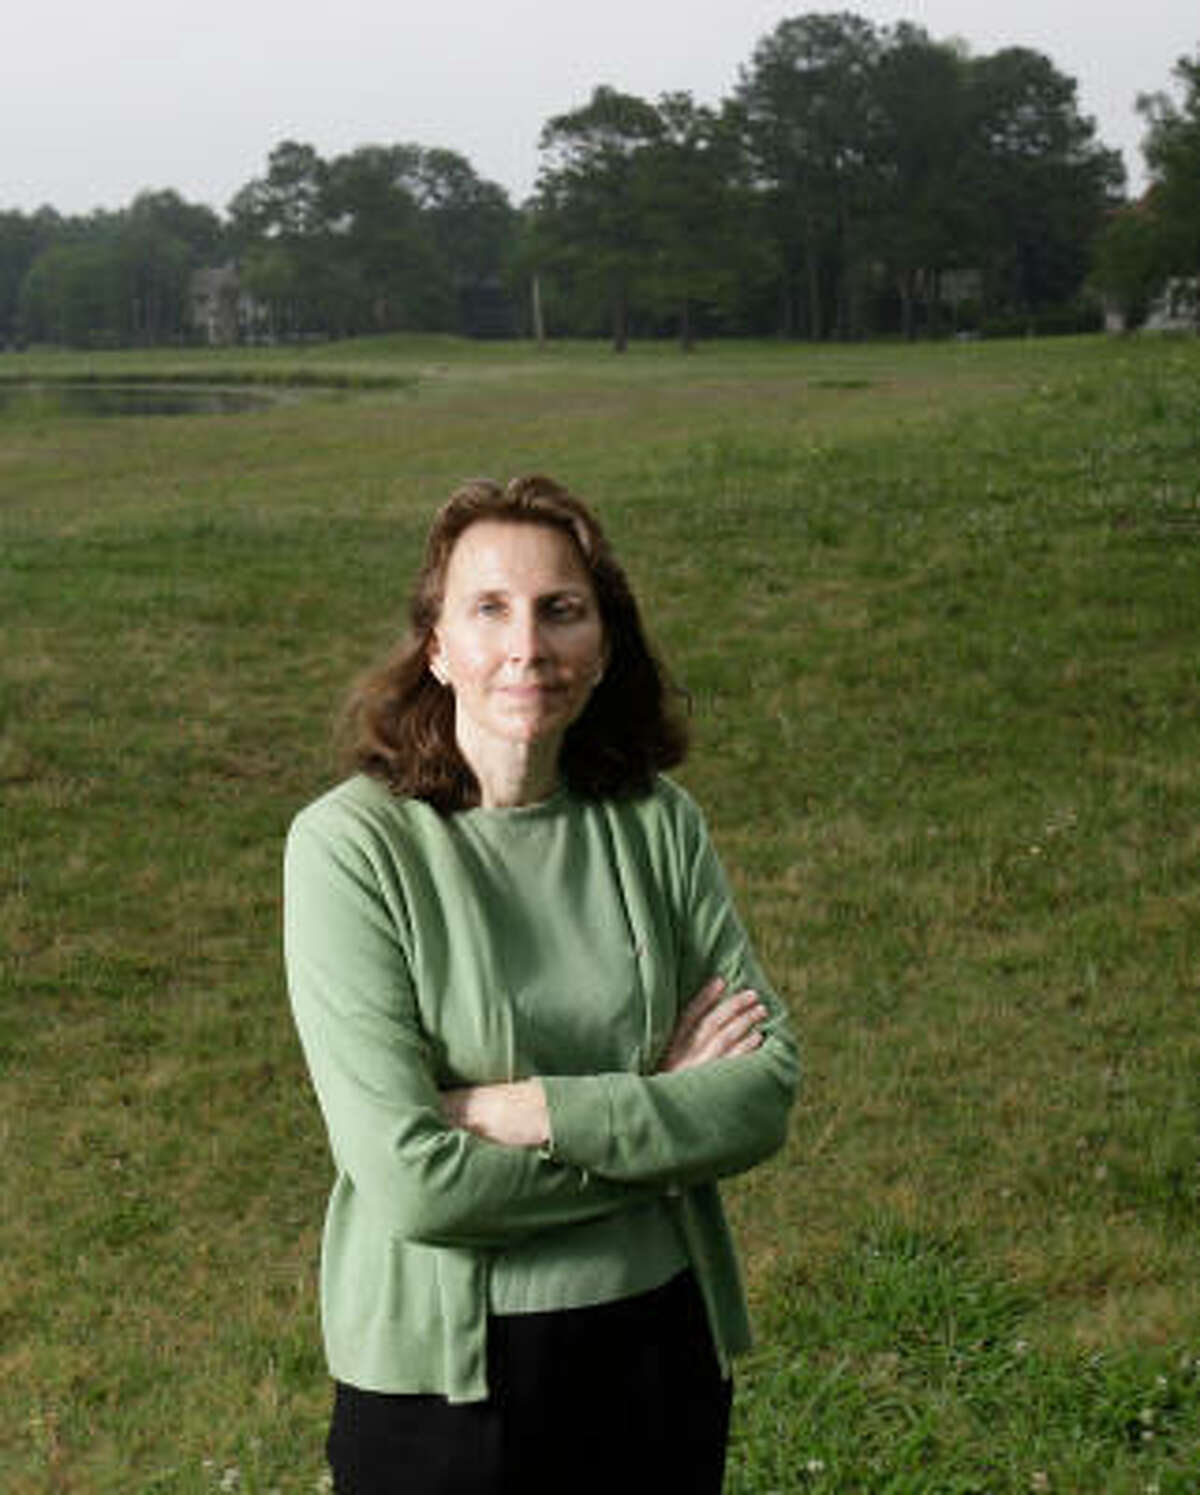 Julie Grothues was one of the leaders of the Inwood Forest homeowners association, which successfully fought to preserve the integrity of the now-defunct golf course in their subdivision. The new owners wanted to flip the property, but lost in court.